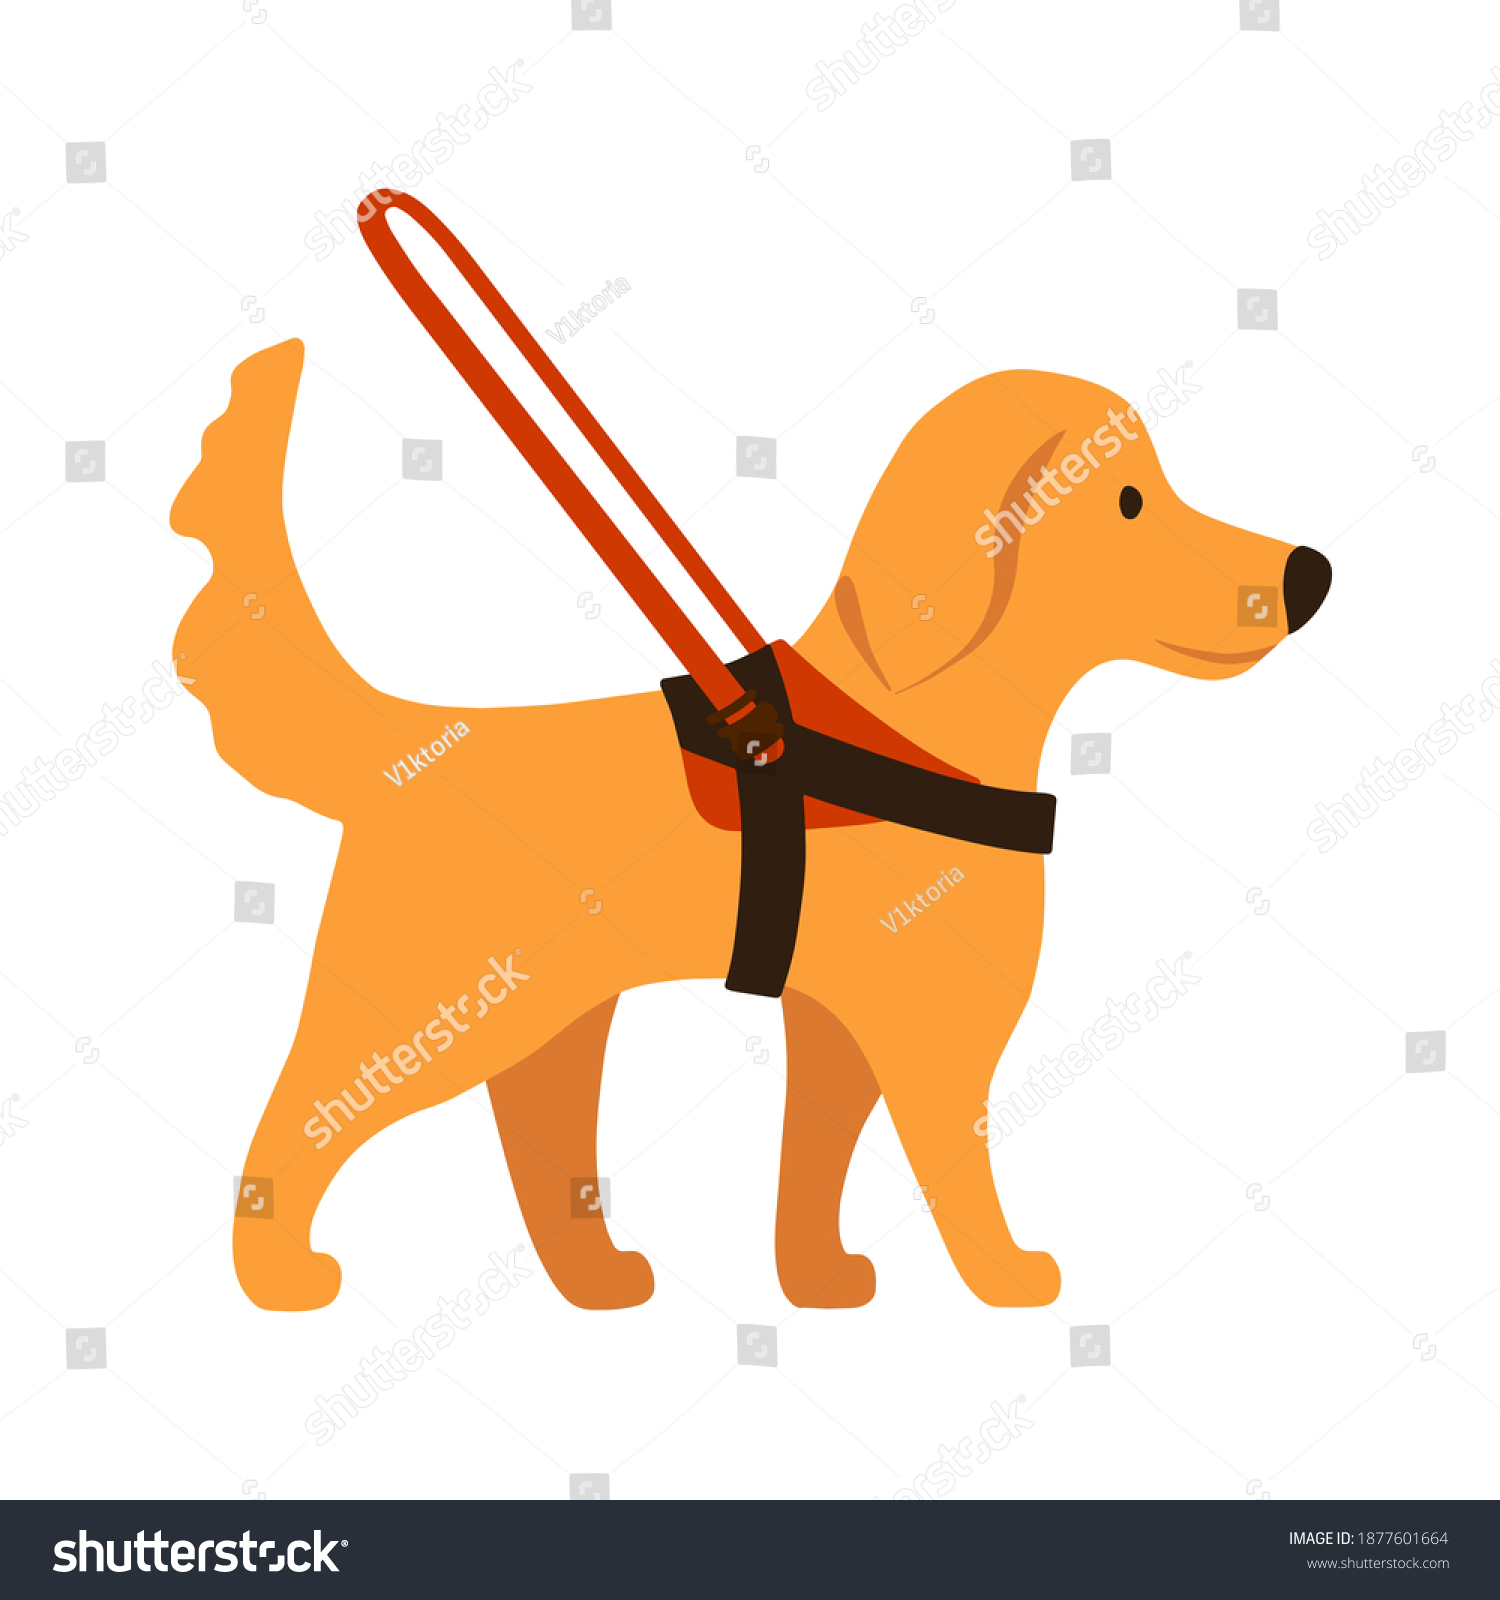 SVG of Concept of guide dog leads with harness and long handle cartoon style. Golden Retriever isolated on white background. Flat design for poster, banner, flyer, web, mockup, business, company,  sign. svg